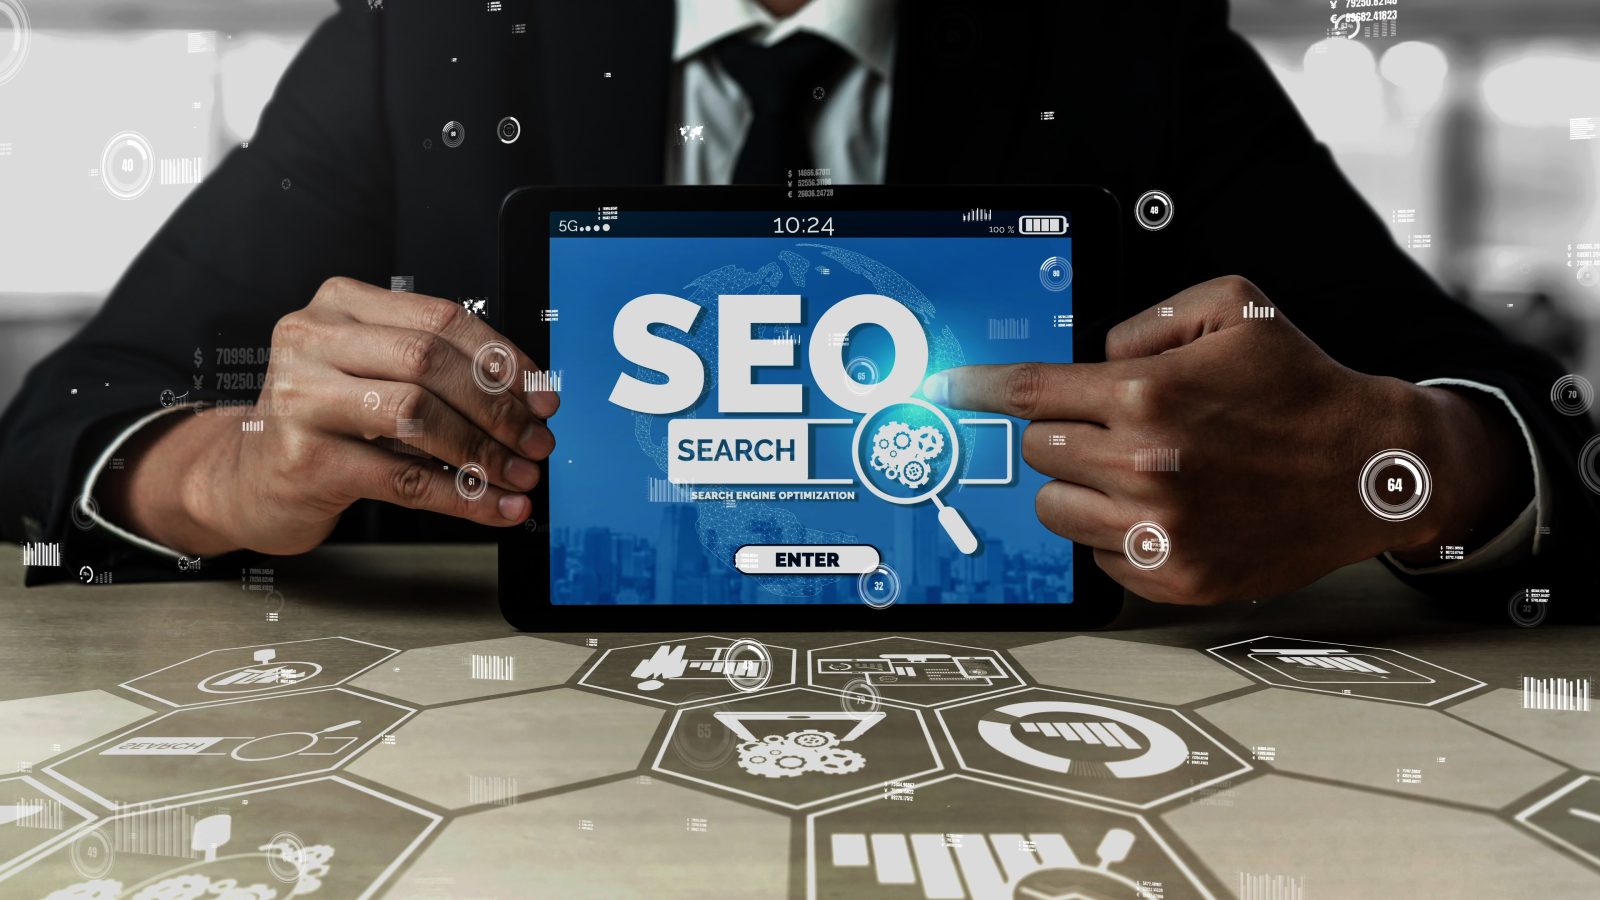 Local SEO for Small Businesses